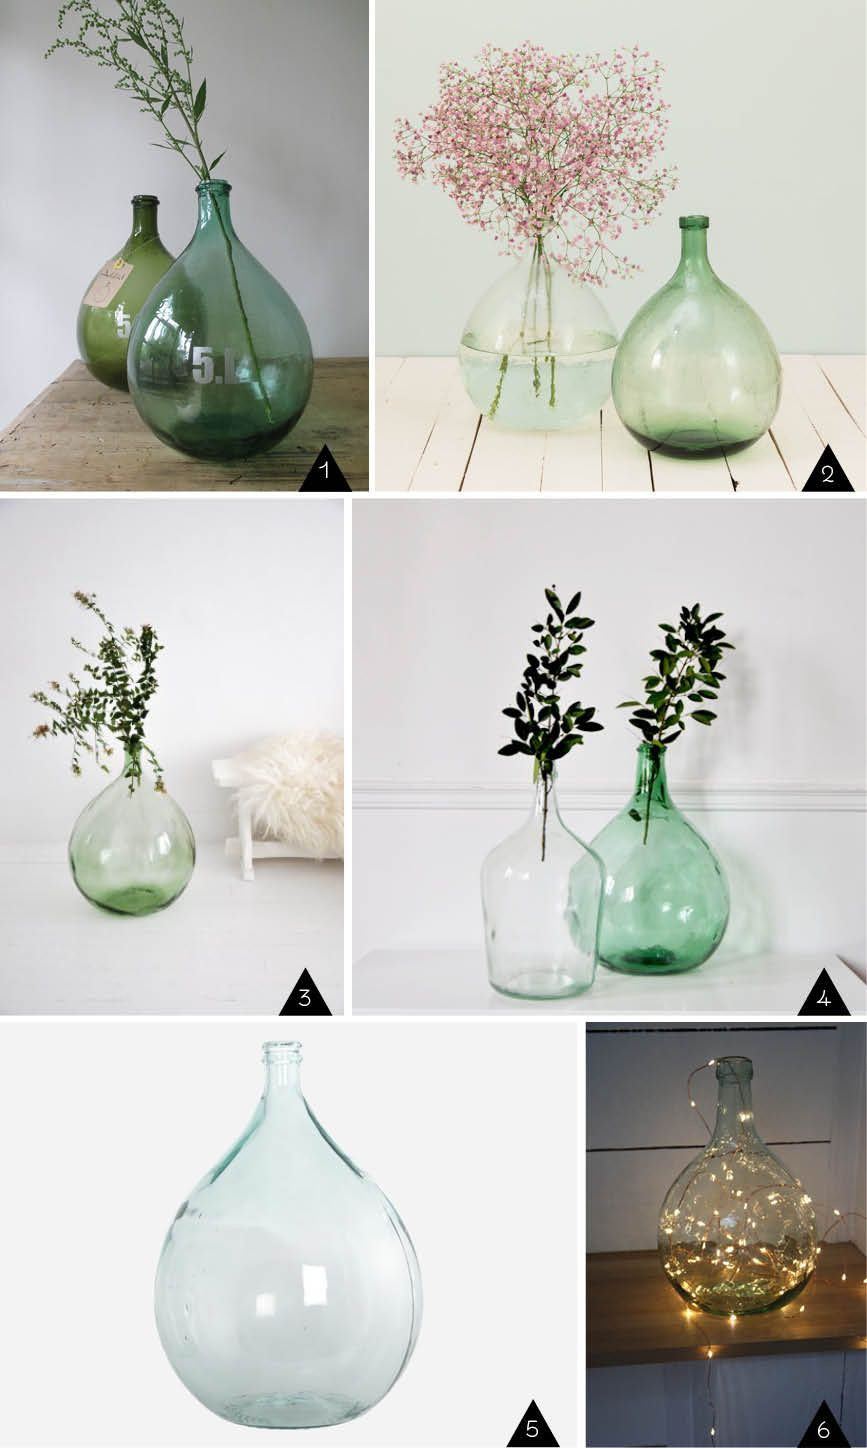 26 Great Home Goods Tall Vases 2024 free download home goods tall vases of dacor de dame jeanne interiores terrazas decoracionambientes intended for dacor de dame jeanne interiores terrazas decoracionambientes pinterest home decor home and 